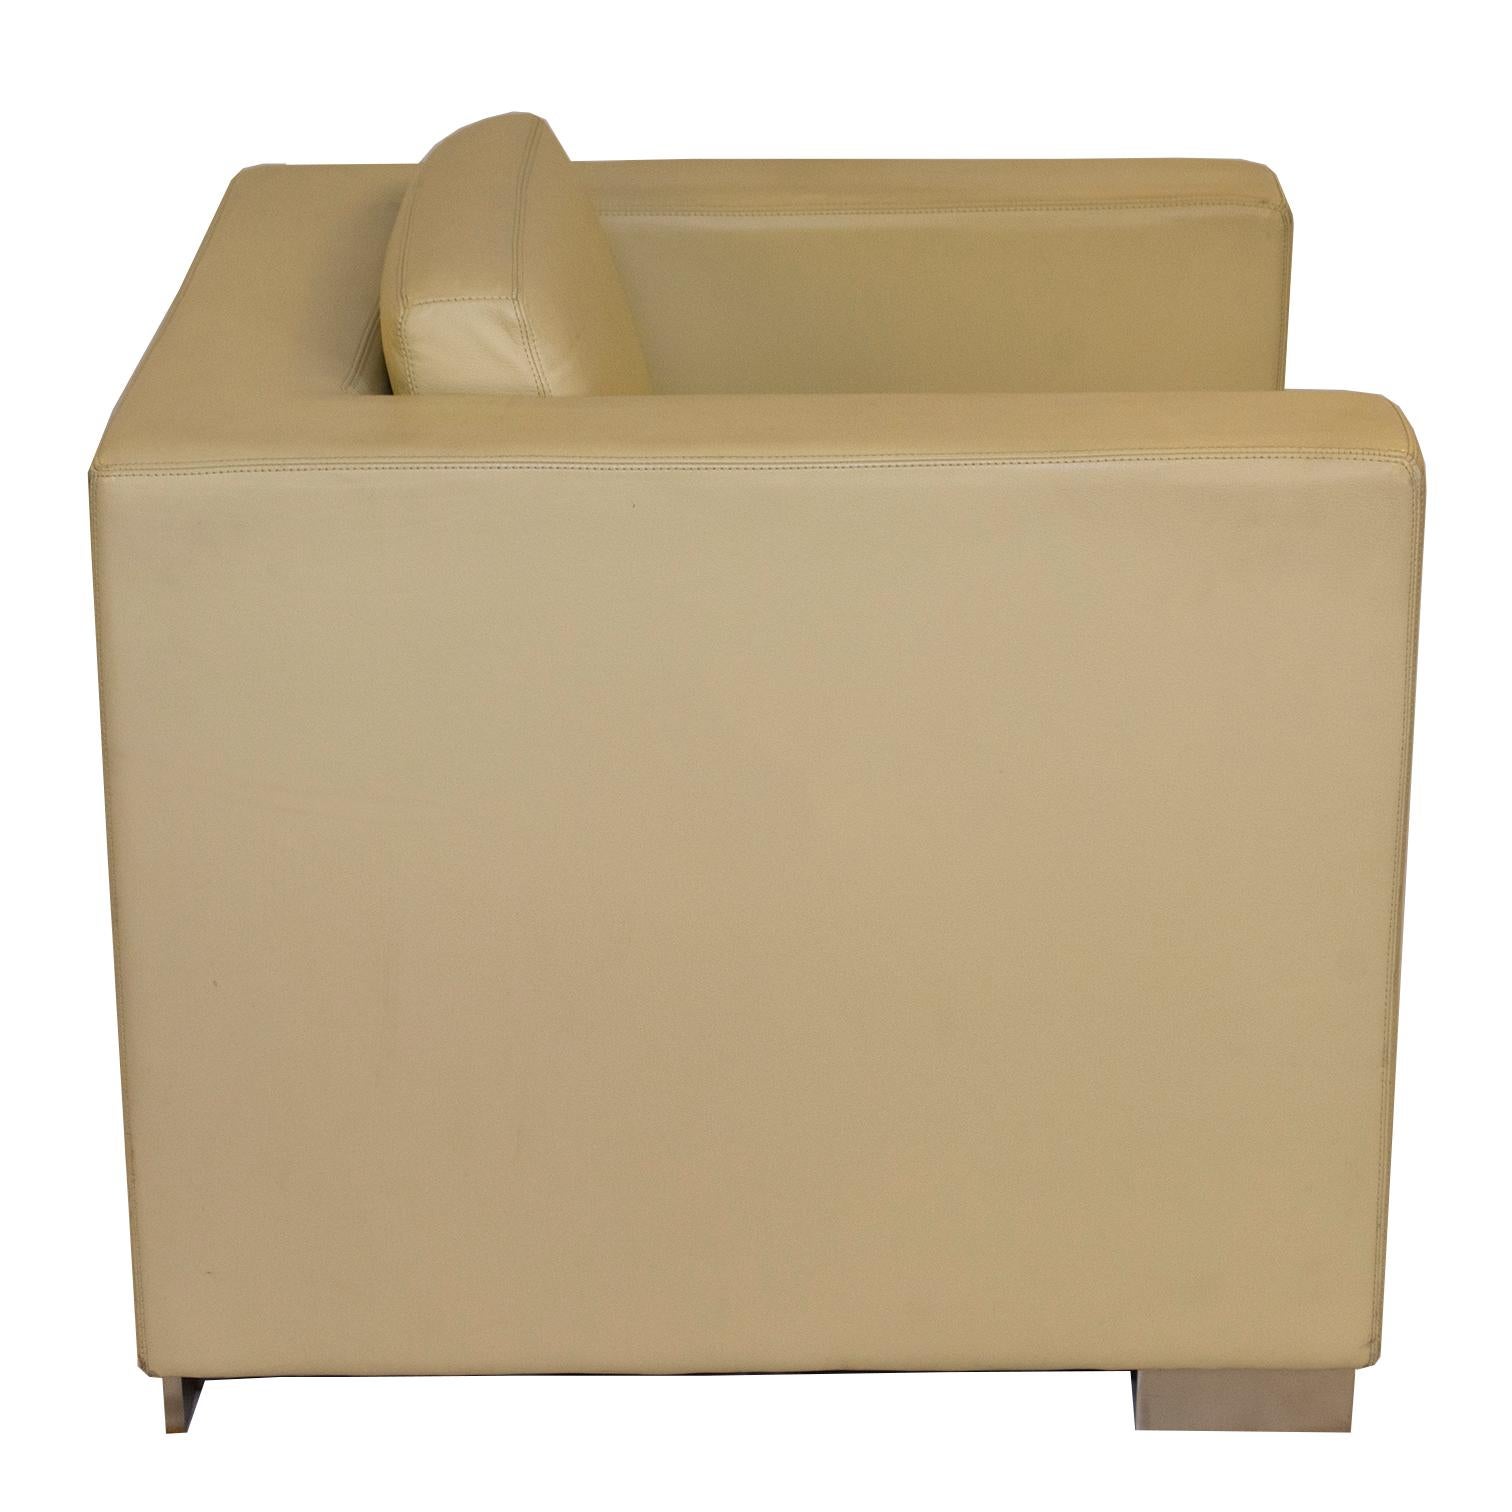 American Pair of Cube Lounge Chairs in Creme Leather by Bernhardt Furniture